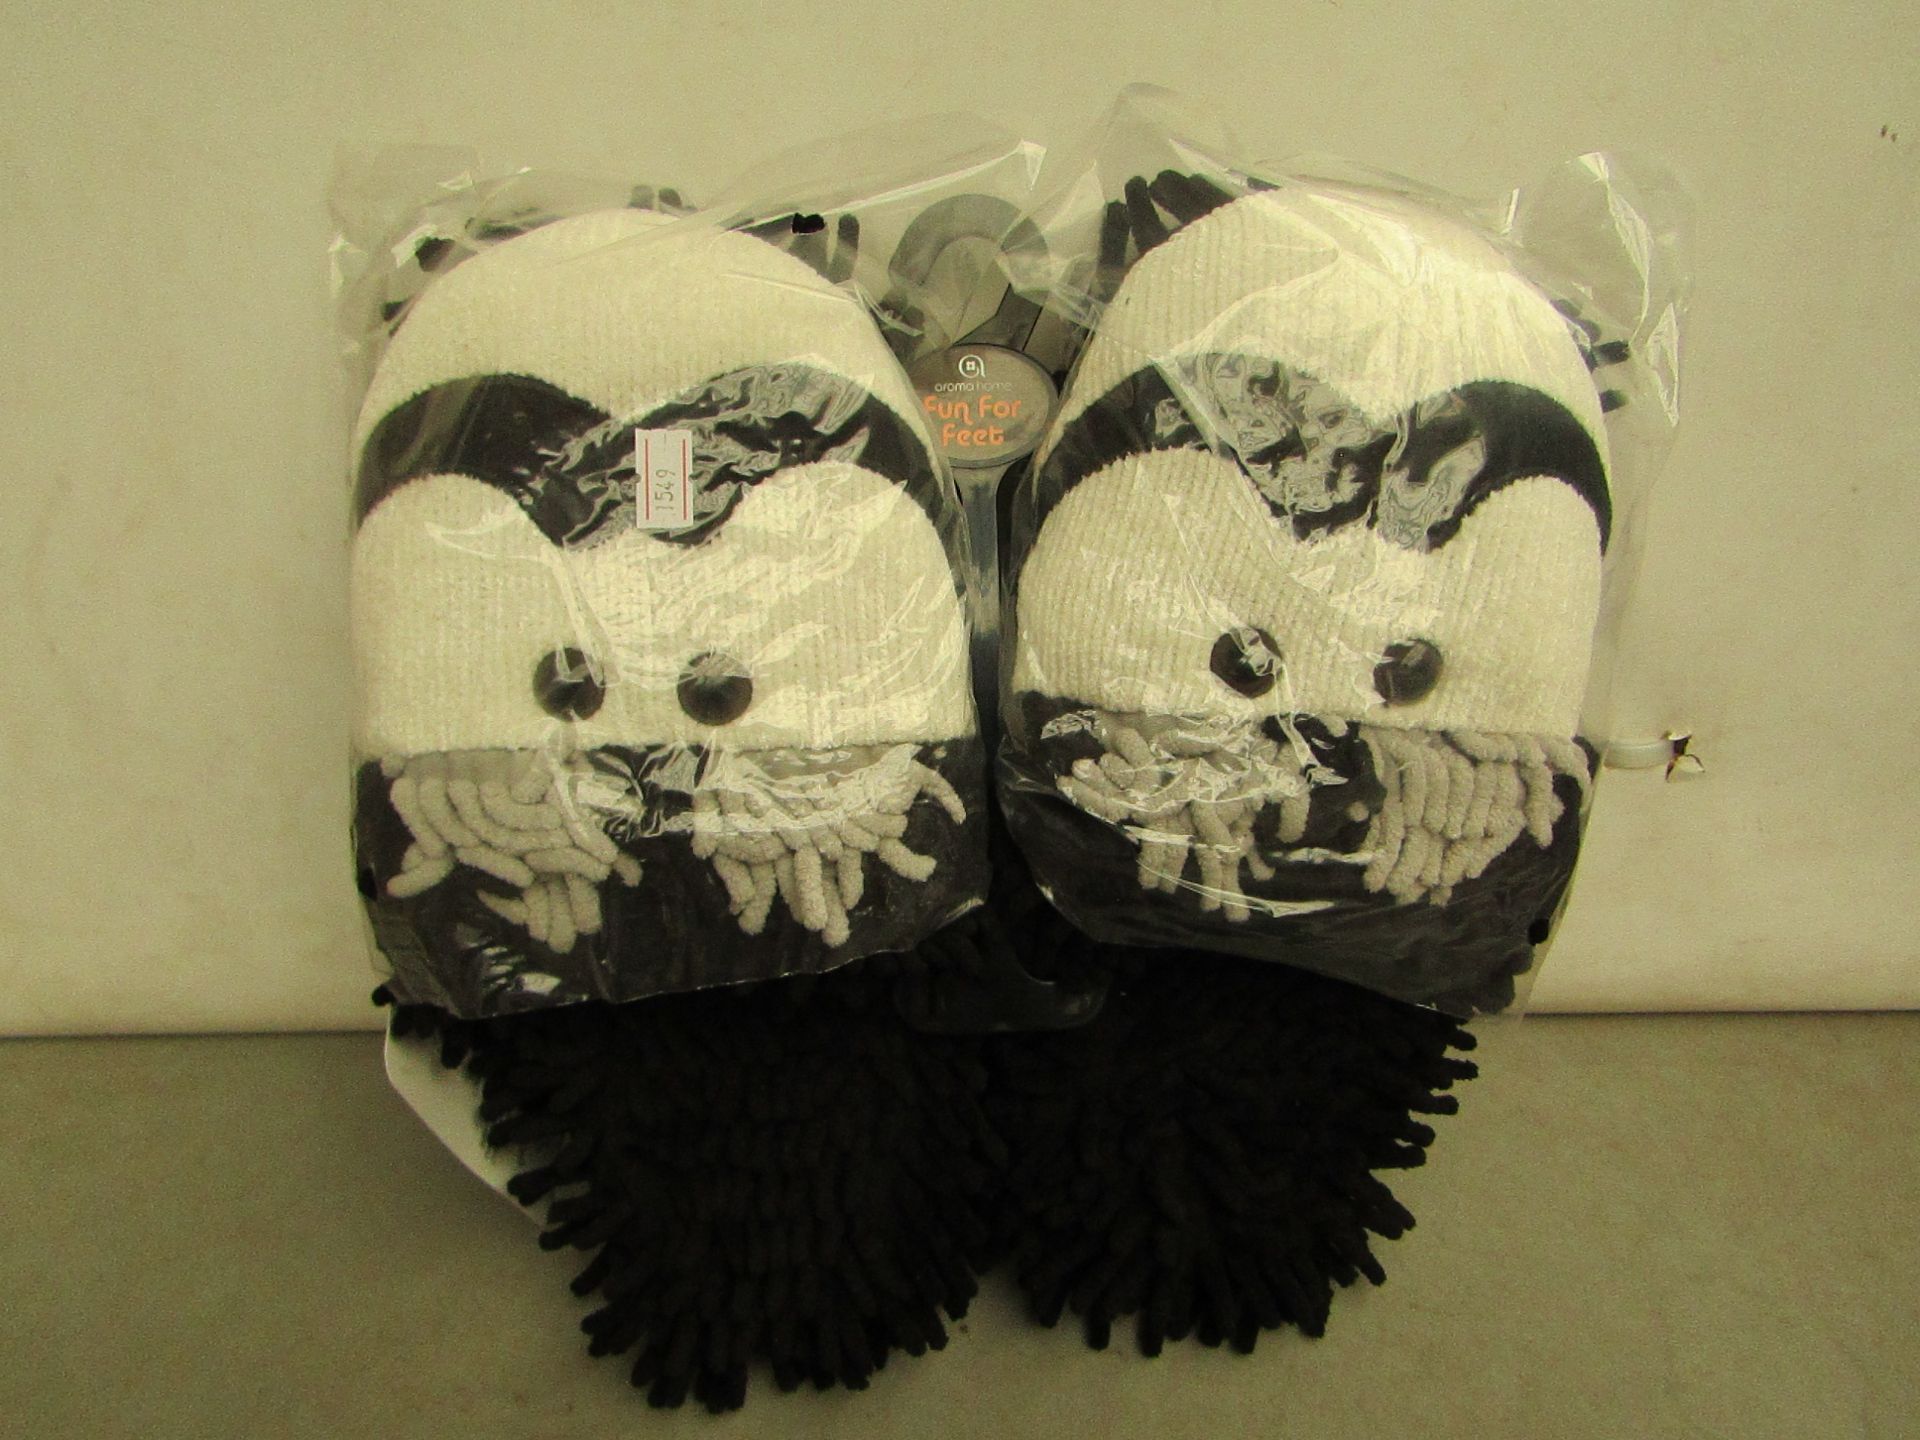 Pair of Fun For Feet Fuzzy Slippers. Size 7. New with tags